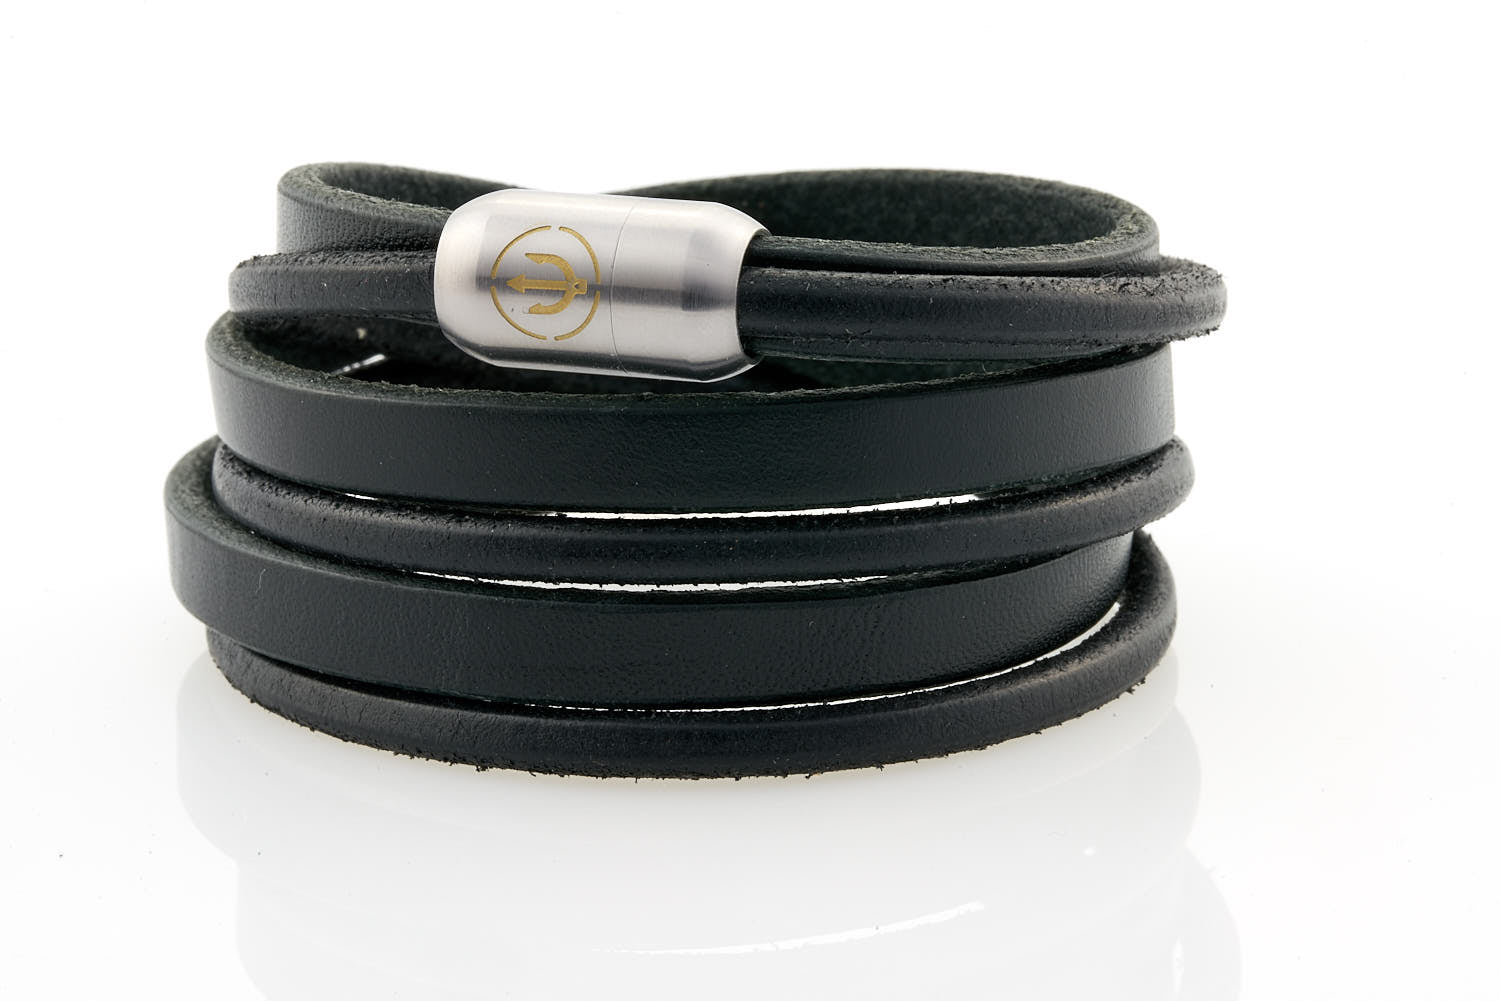 Captn by Neptn - Black Leather bracelet triple wrapped with steel magnetic clasp and gold trident engraving